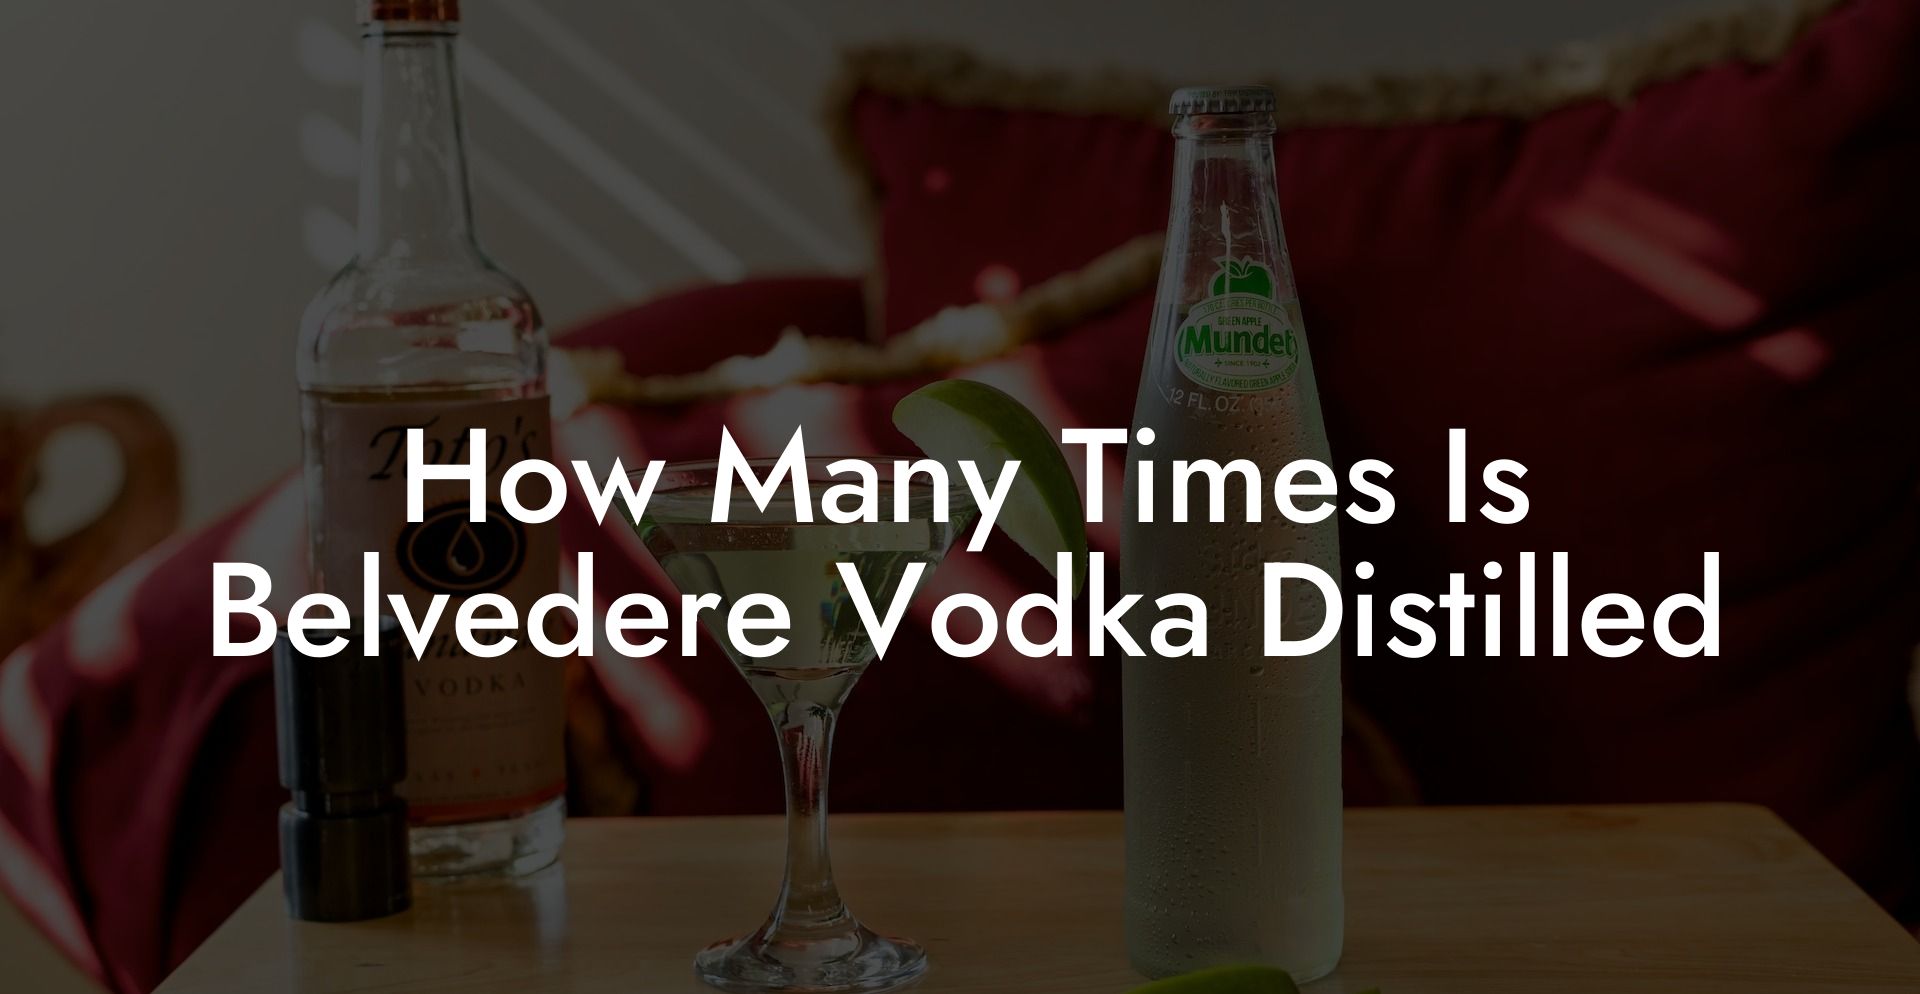 How Many Times Is Belvedere Vodka Distilled